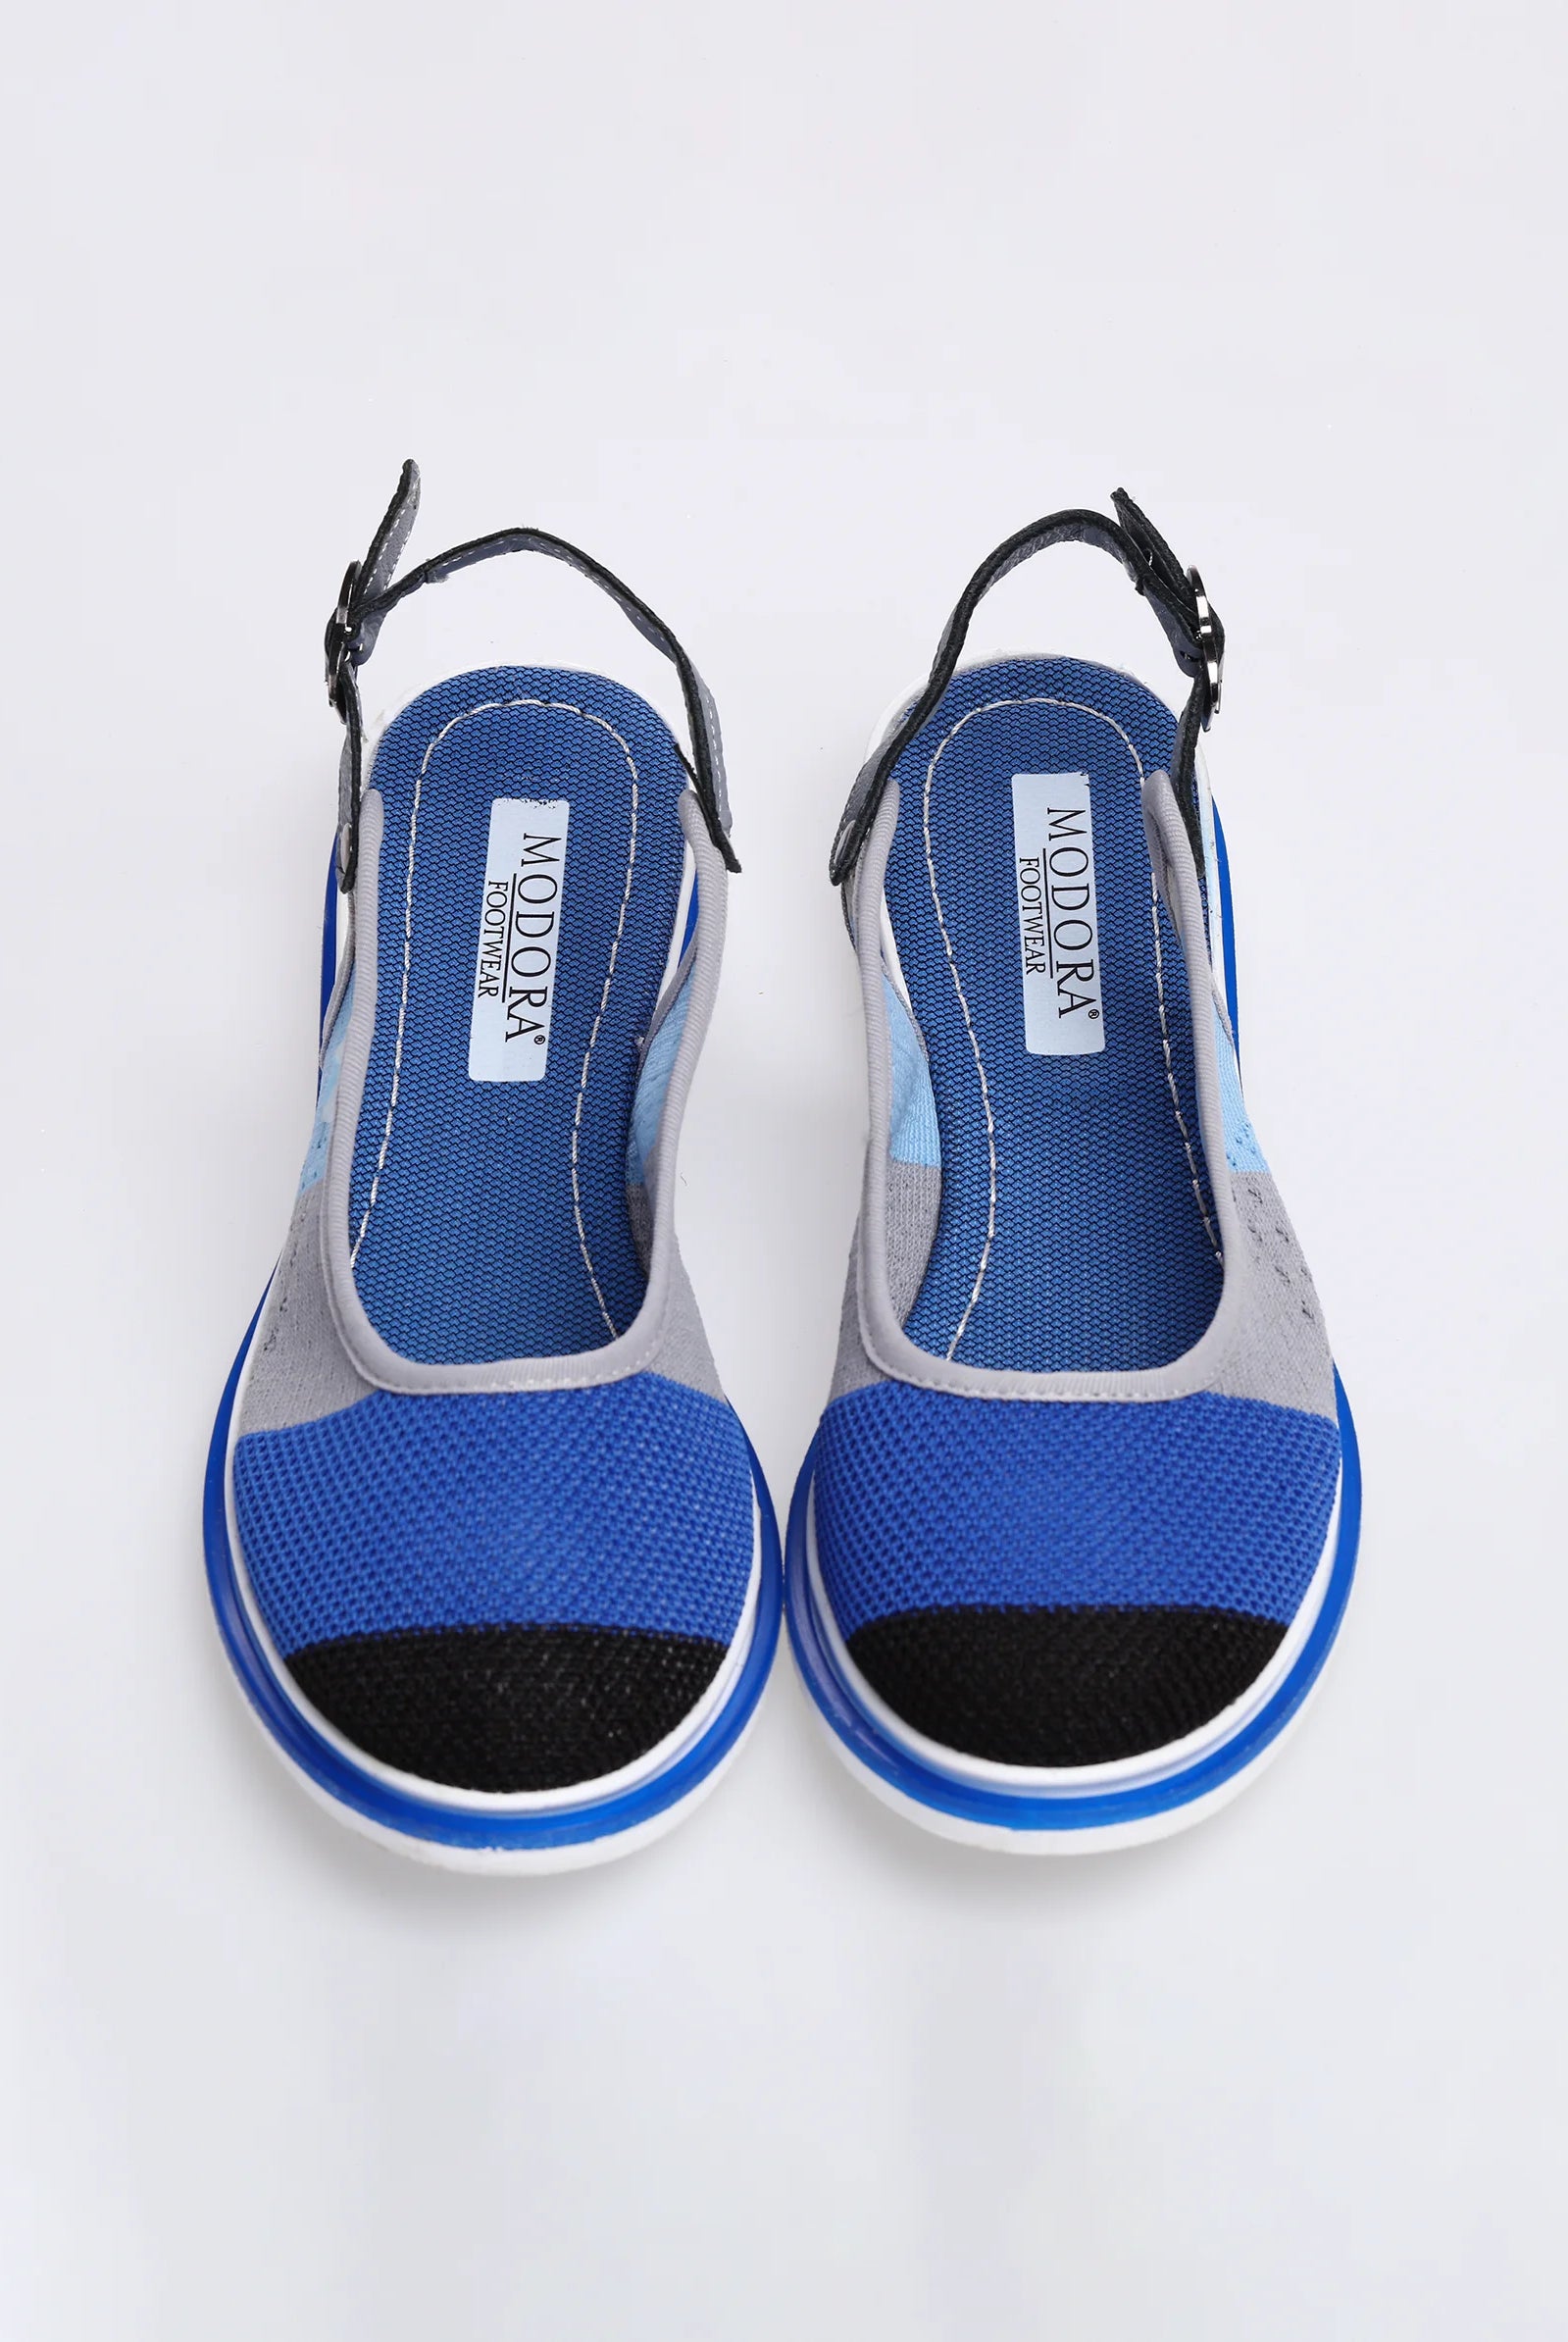 blue and black women flat shoes